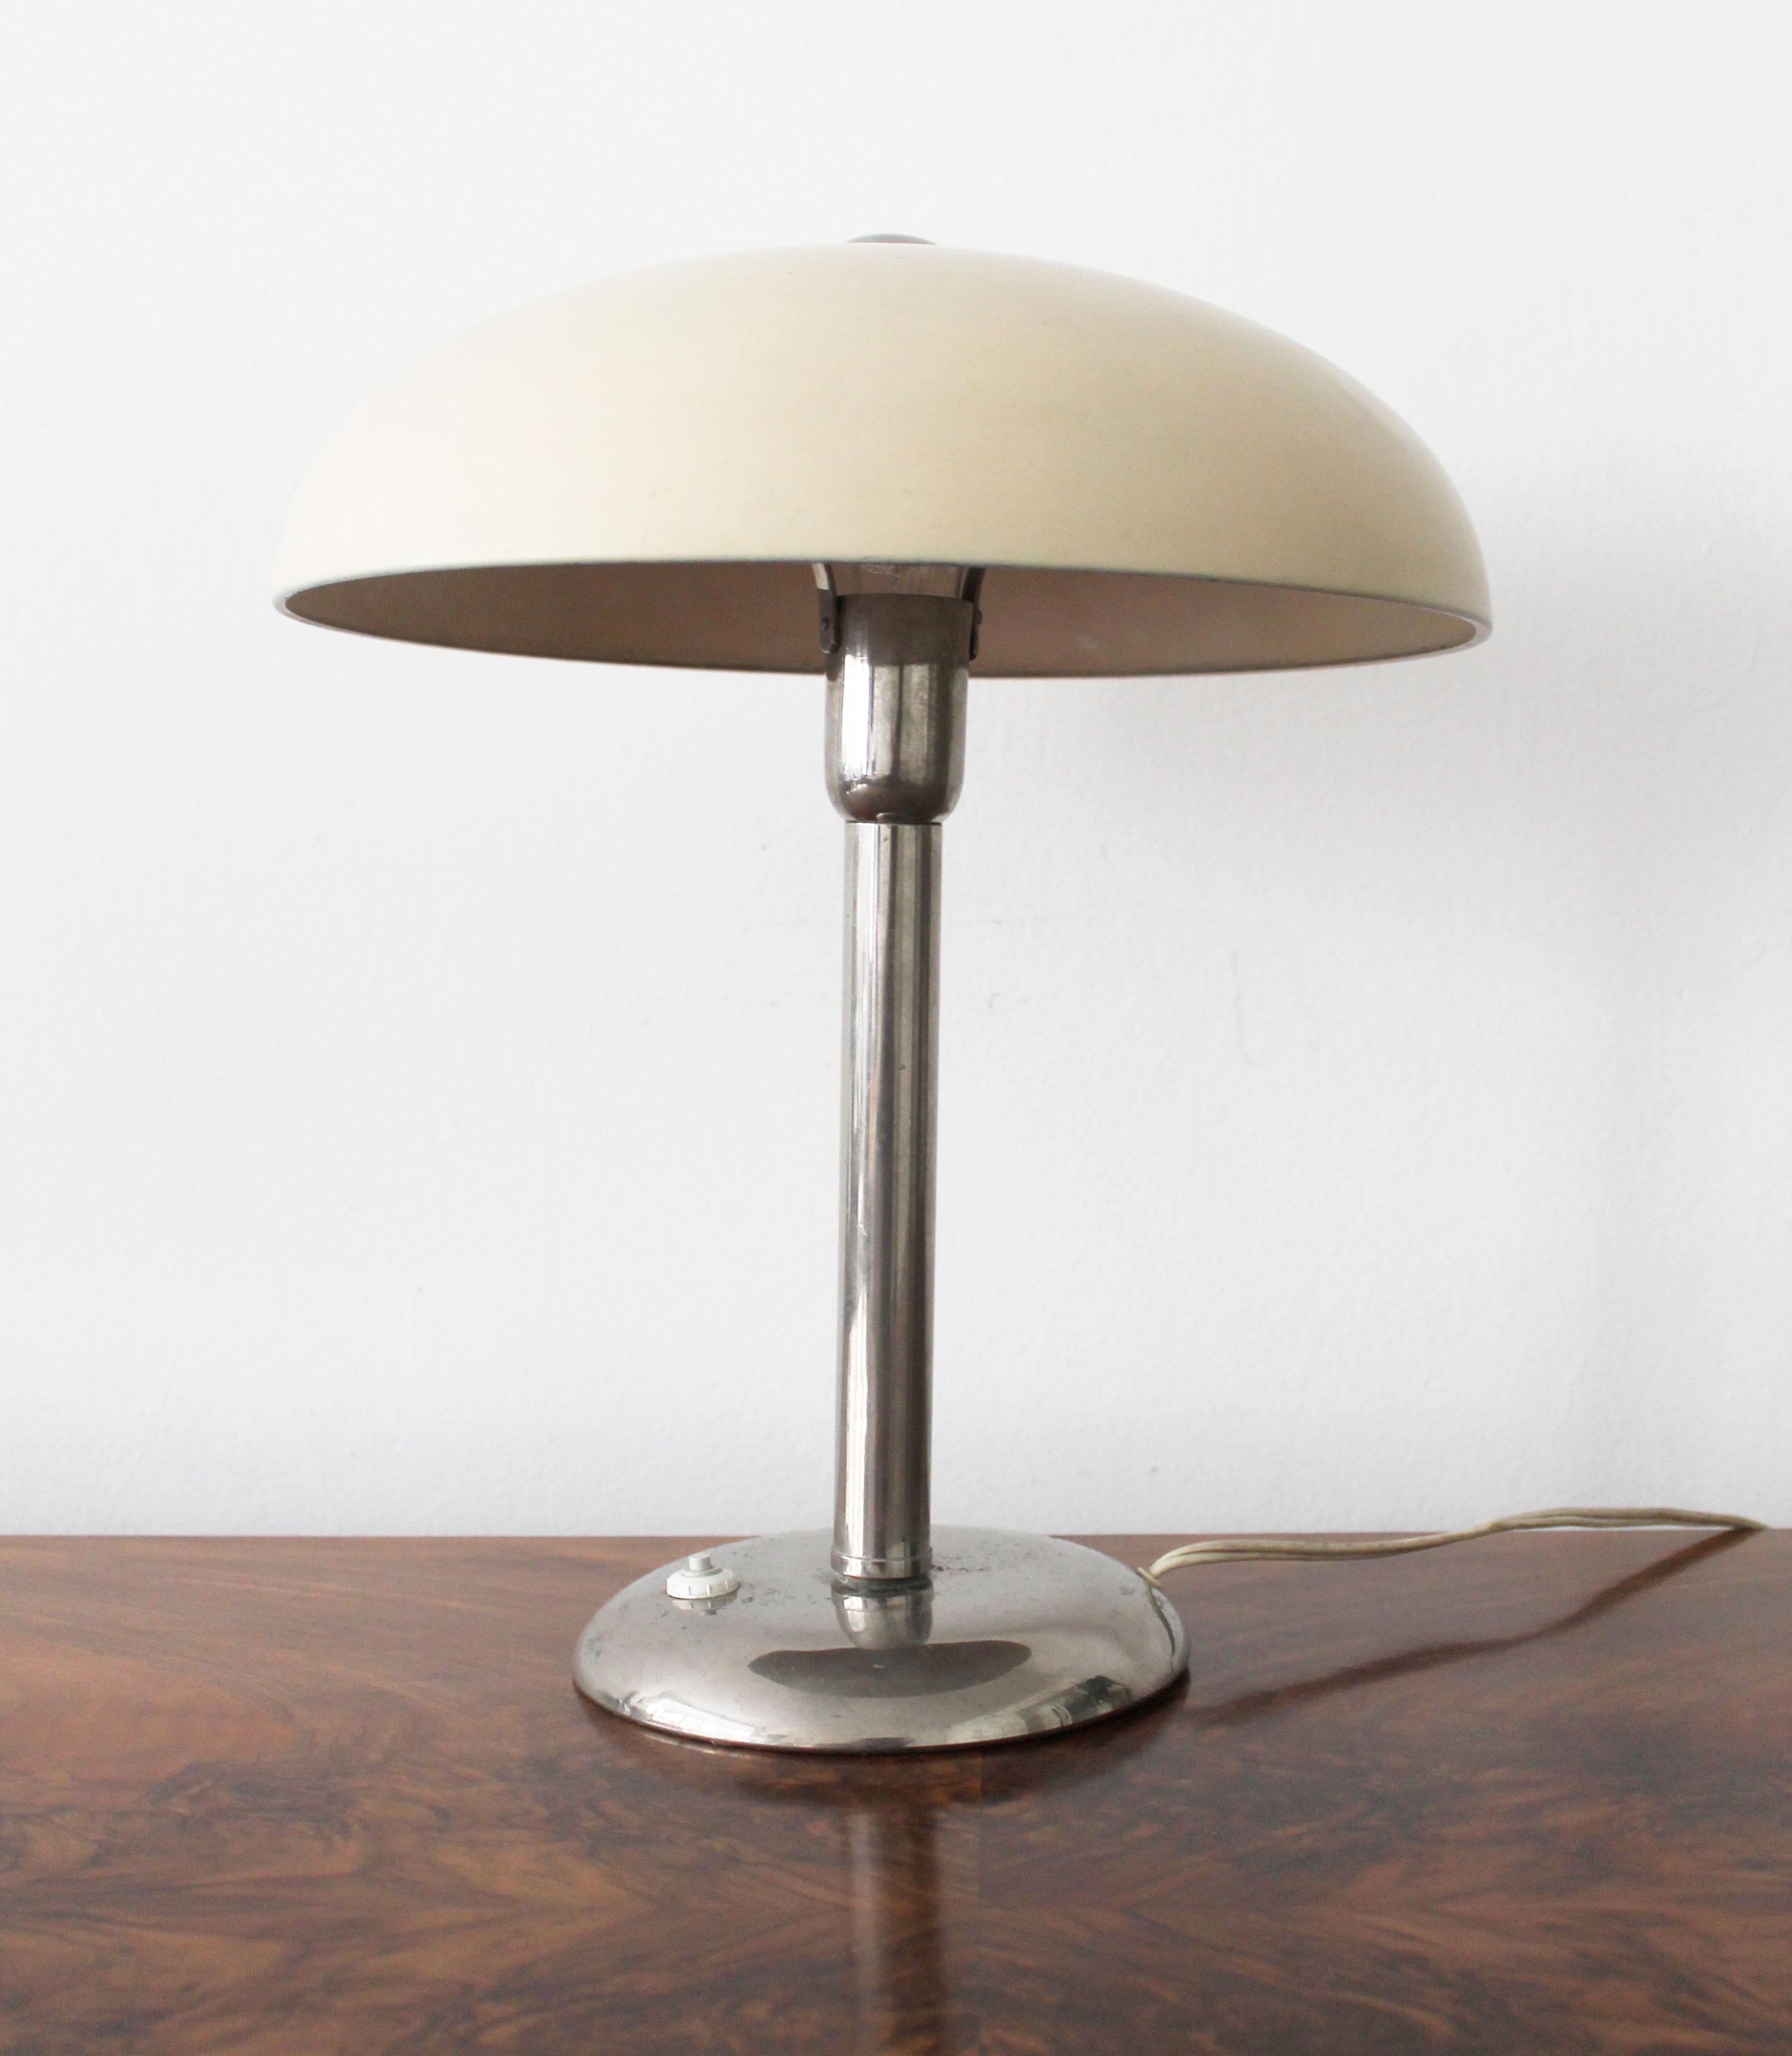 1930's Bauhaus Table Lamp In Good Condition For Sale In Brno, CZ